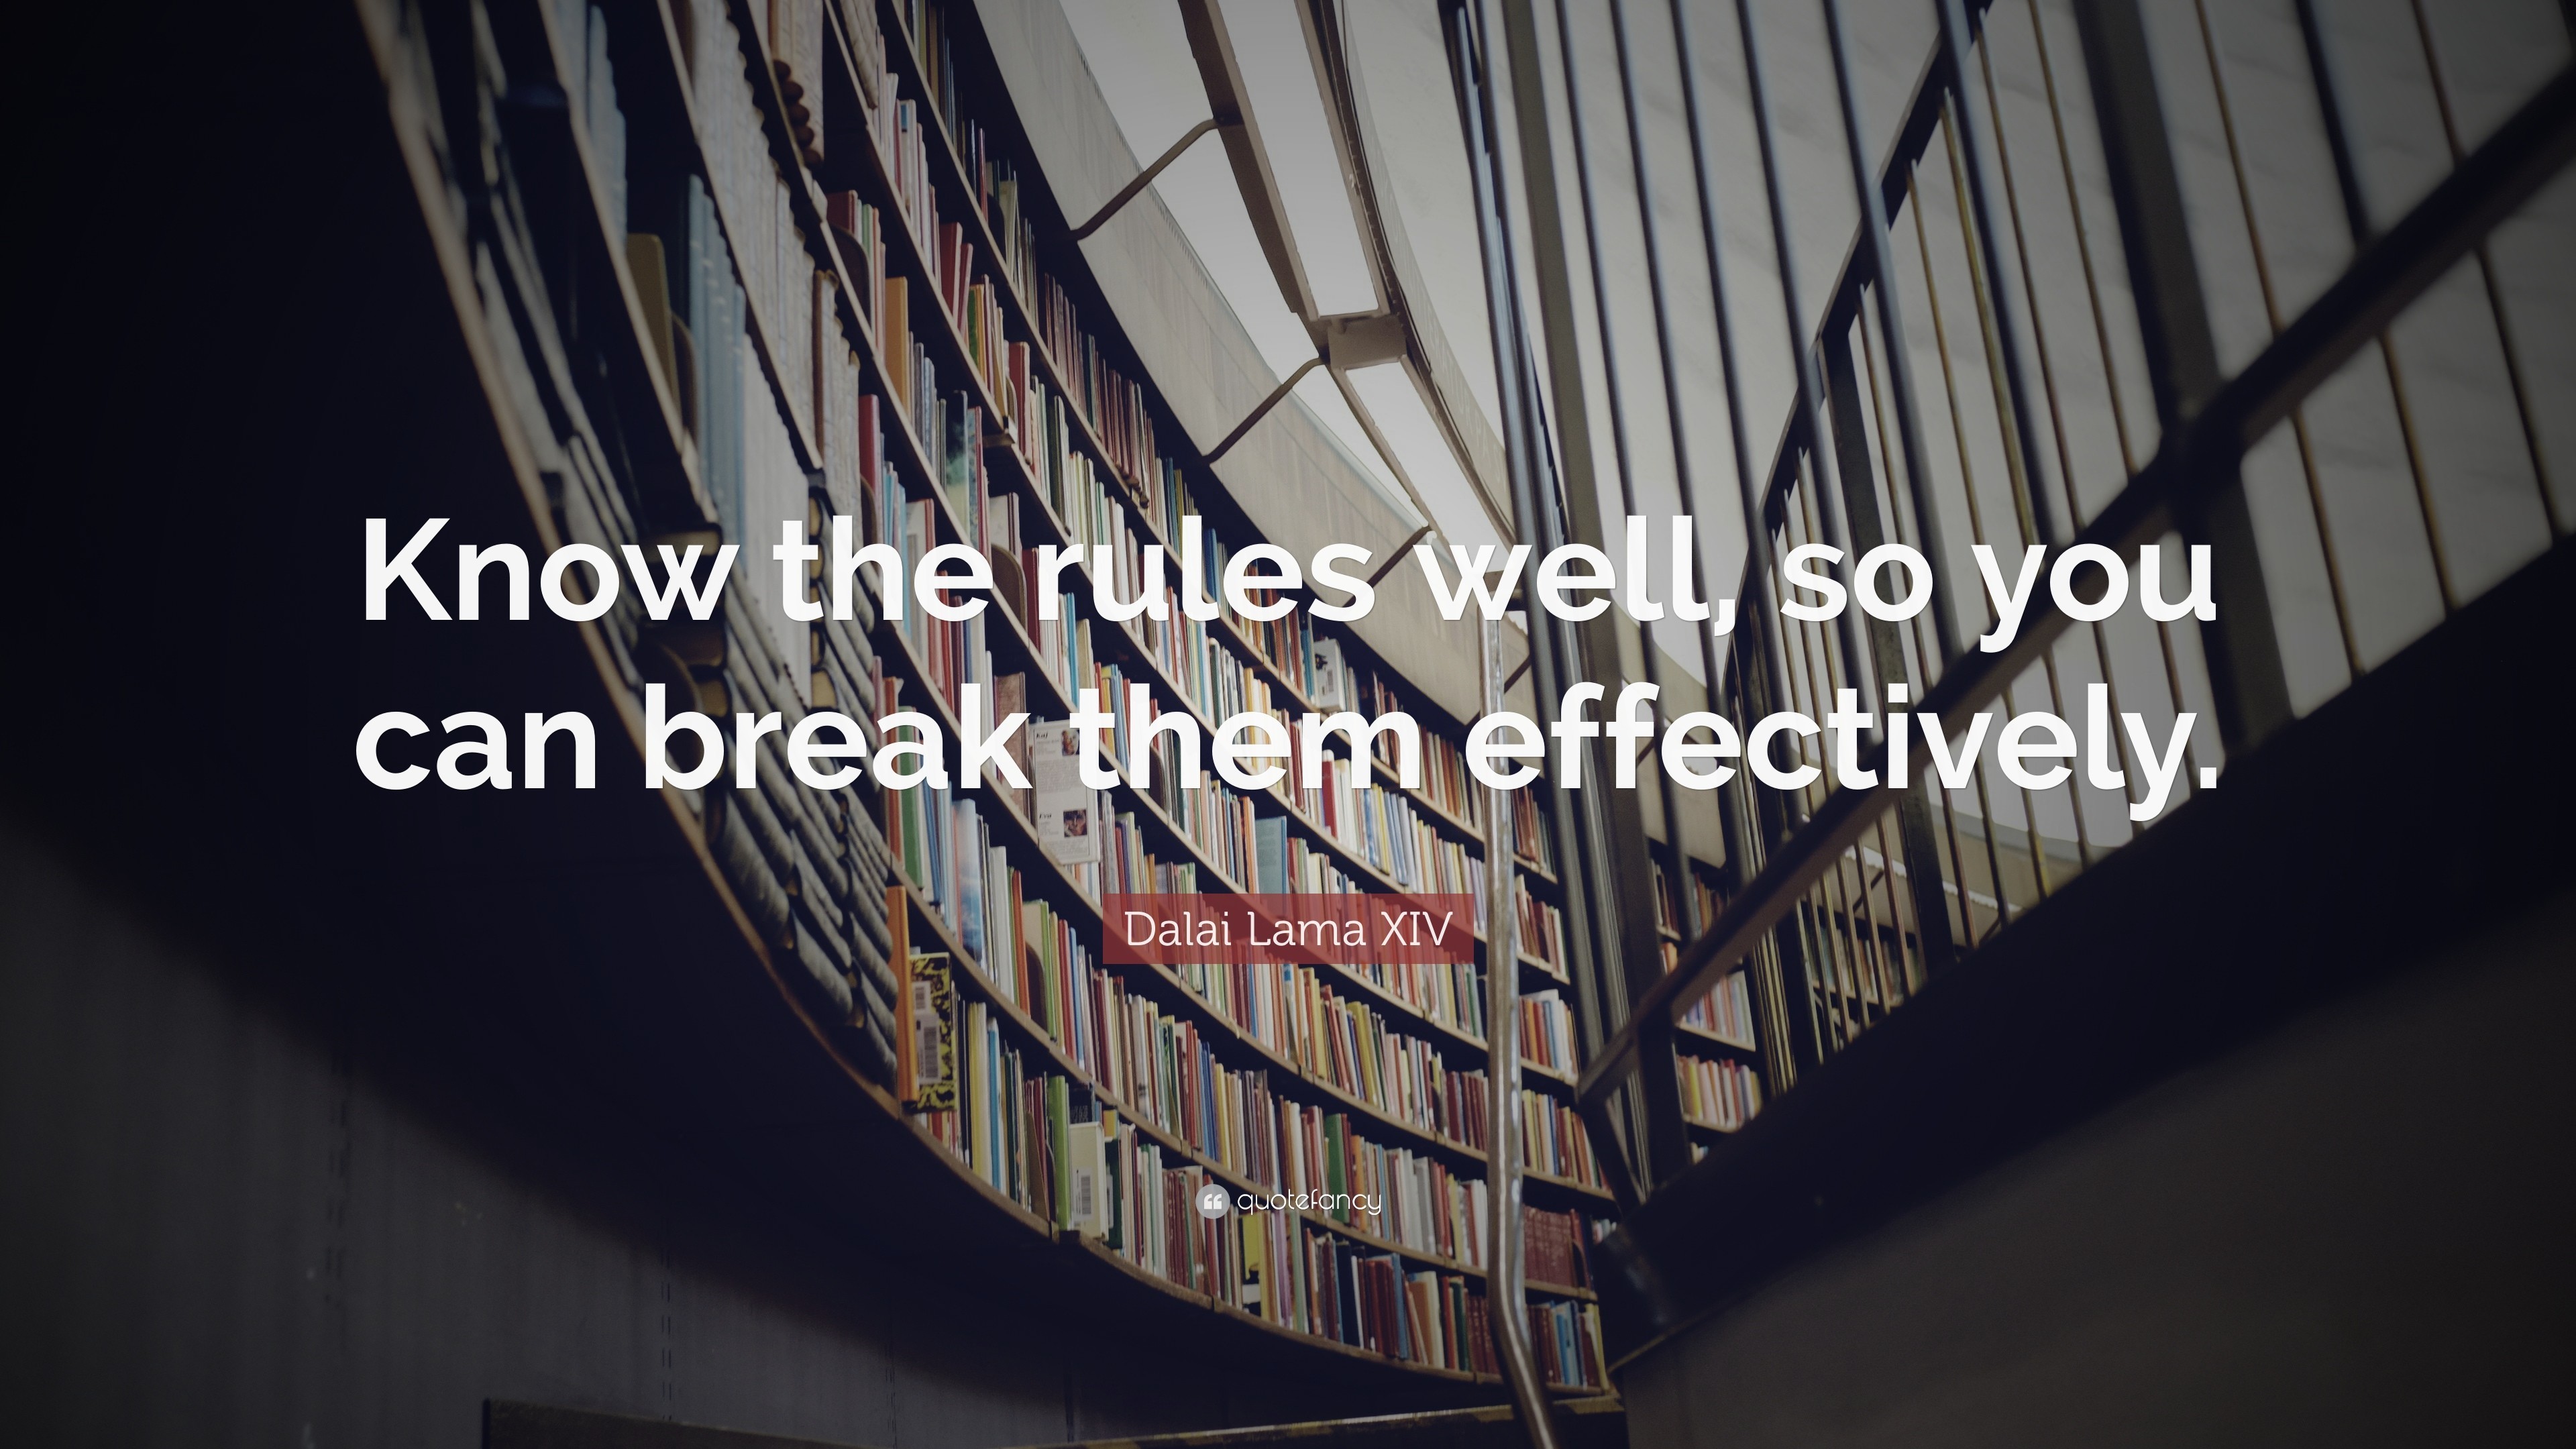 3840x2160 #typography, #motivational, #shelves, #Buddhism, #knowledge, #hallway,  #books, #Dalai Lama, #quote, #library, wallpaper